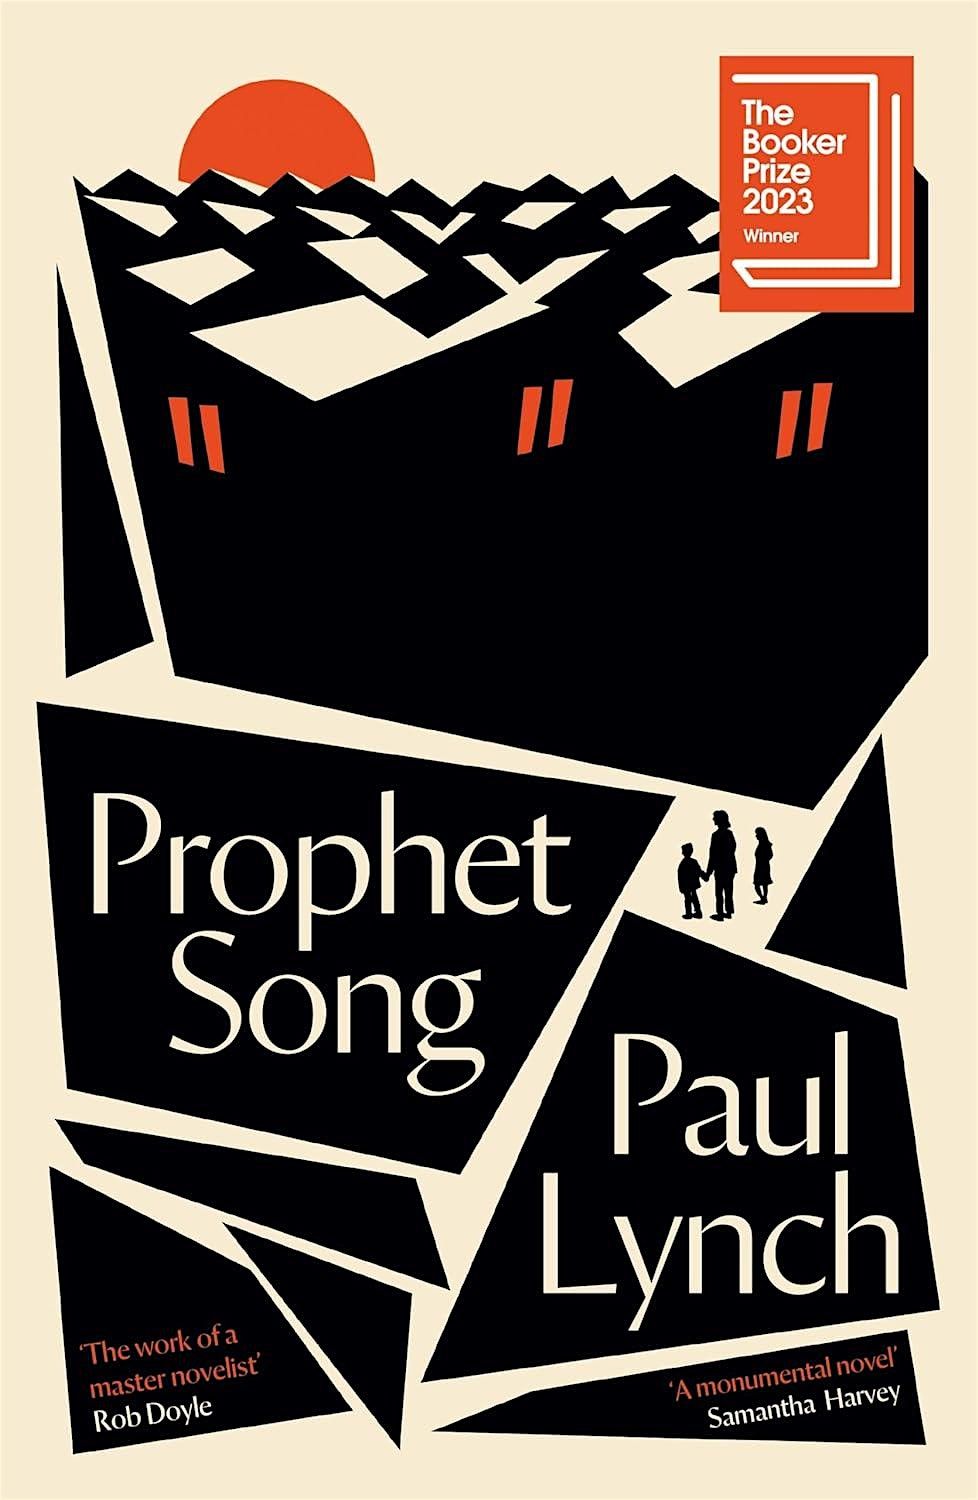 Prophet Song Book Discussion